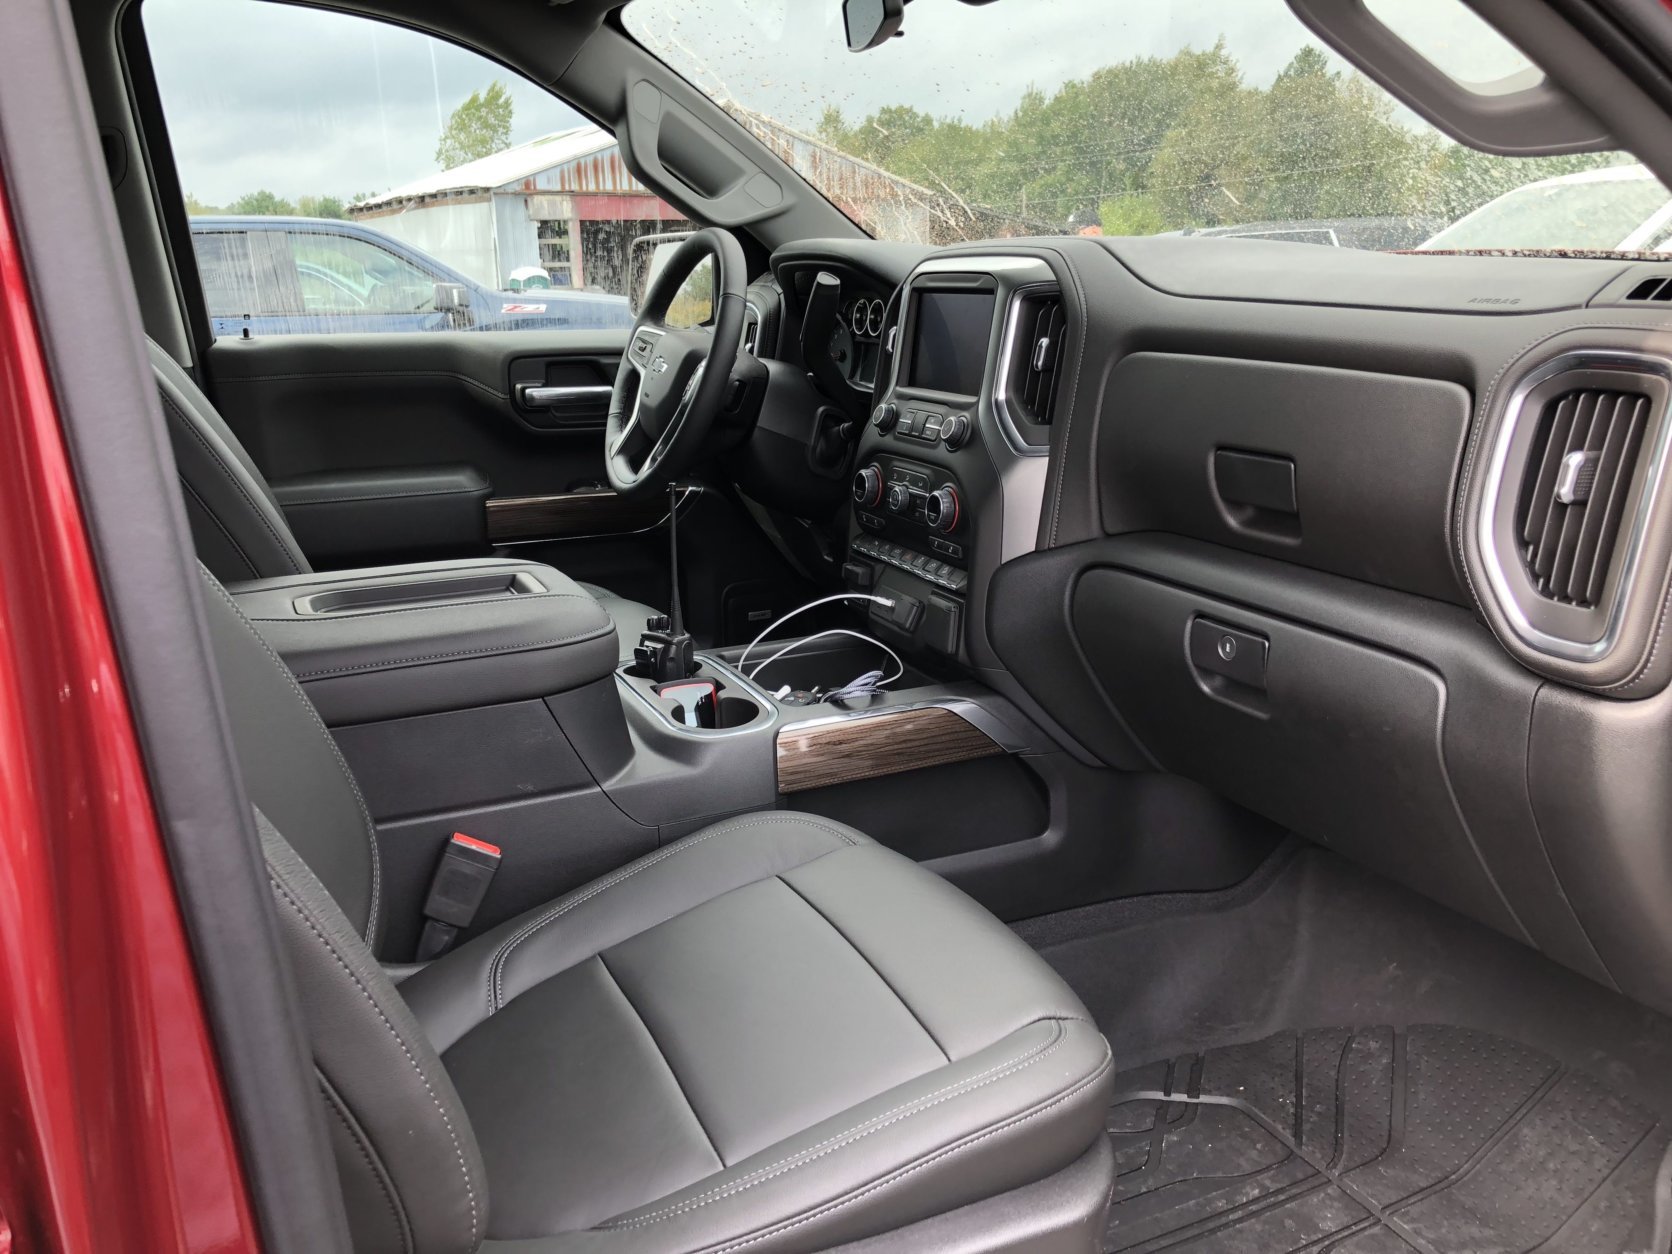 The materials used in the cabin of the new Chevy are a big improvement in quality and feel: much of the hard plastic is banished to places out of sight, and the door panels and dash look more in line with the competition and less like old GM – hard and cheap feeling.  (WTOP/Mike Parris)